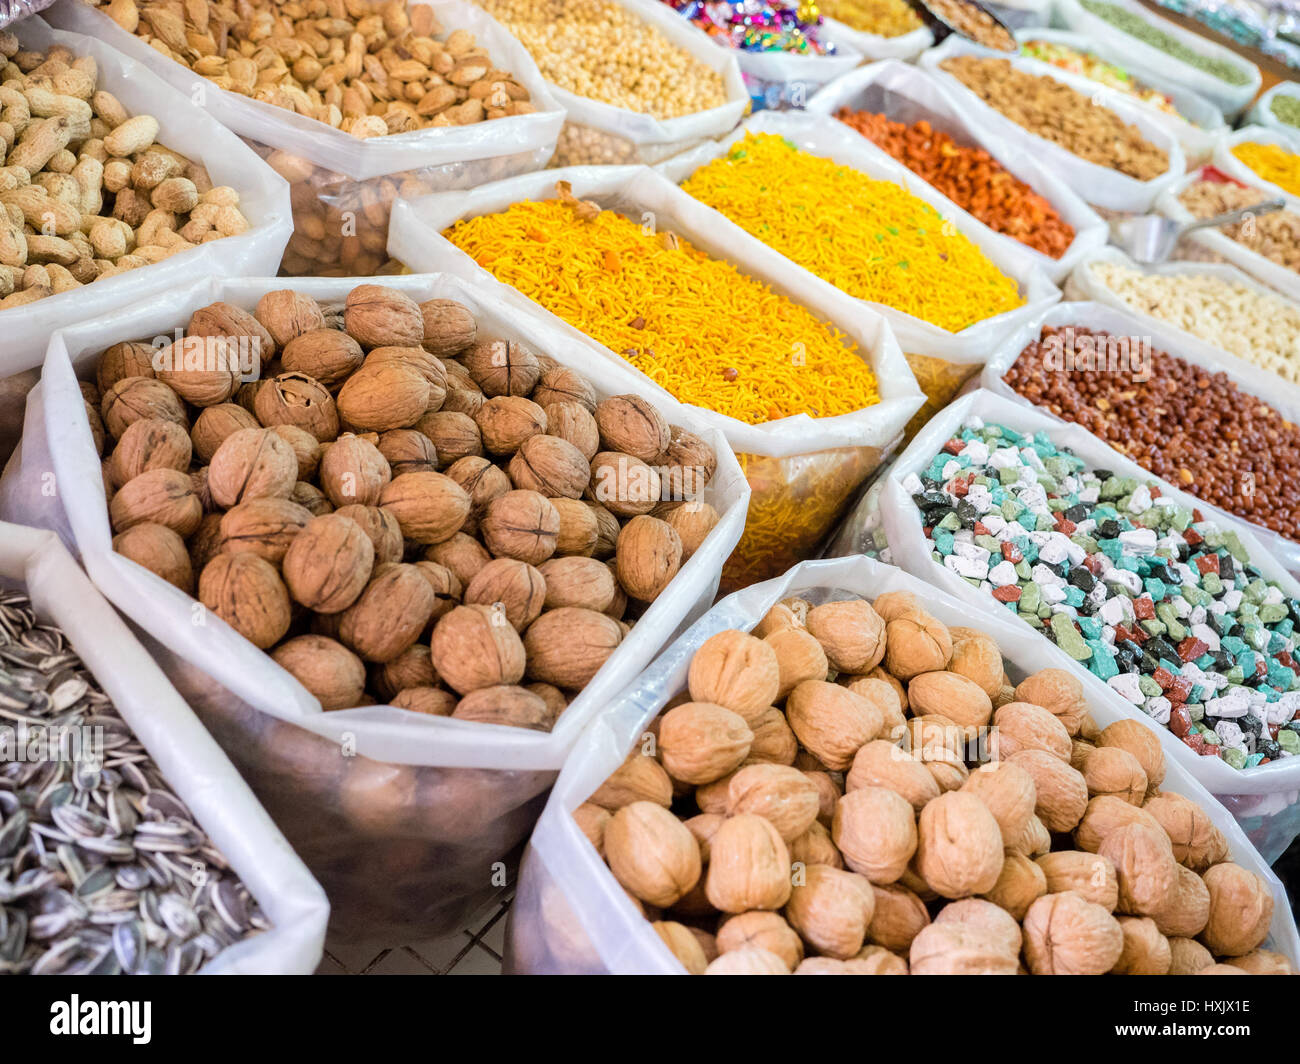 Several bags with colorful food and spices in a market souq at Nizwa, Oman Stock Photo